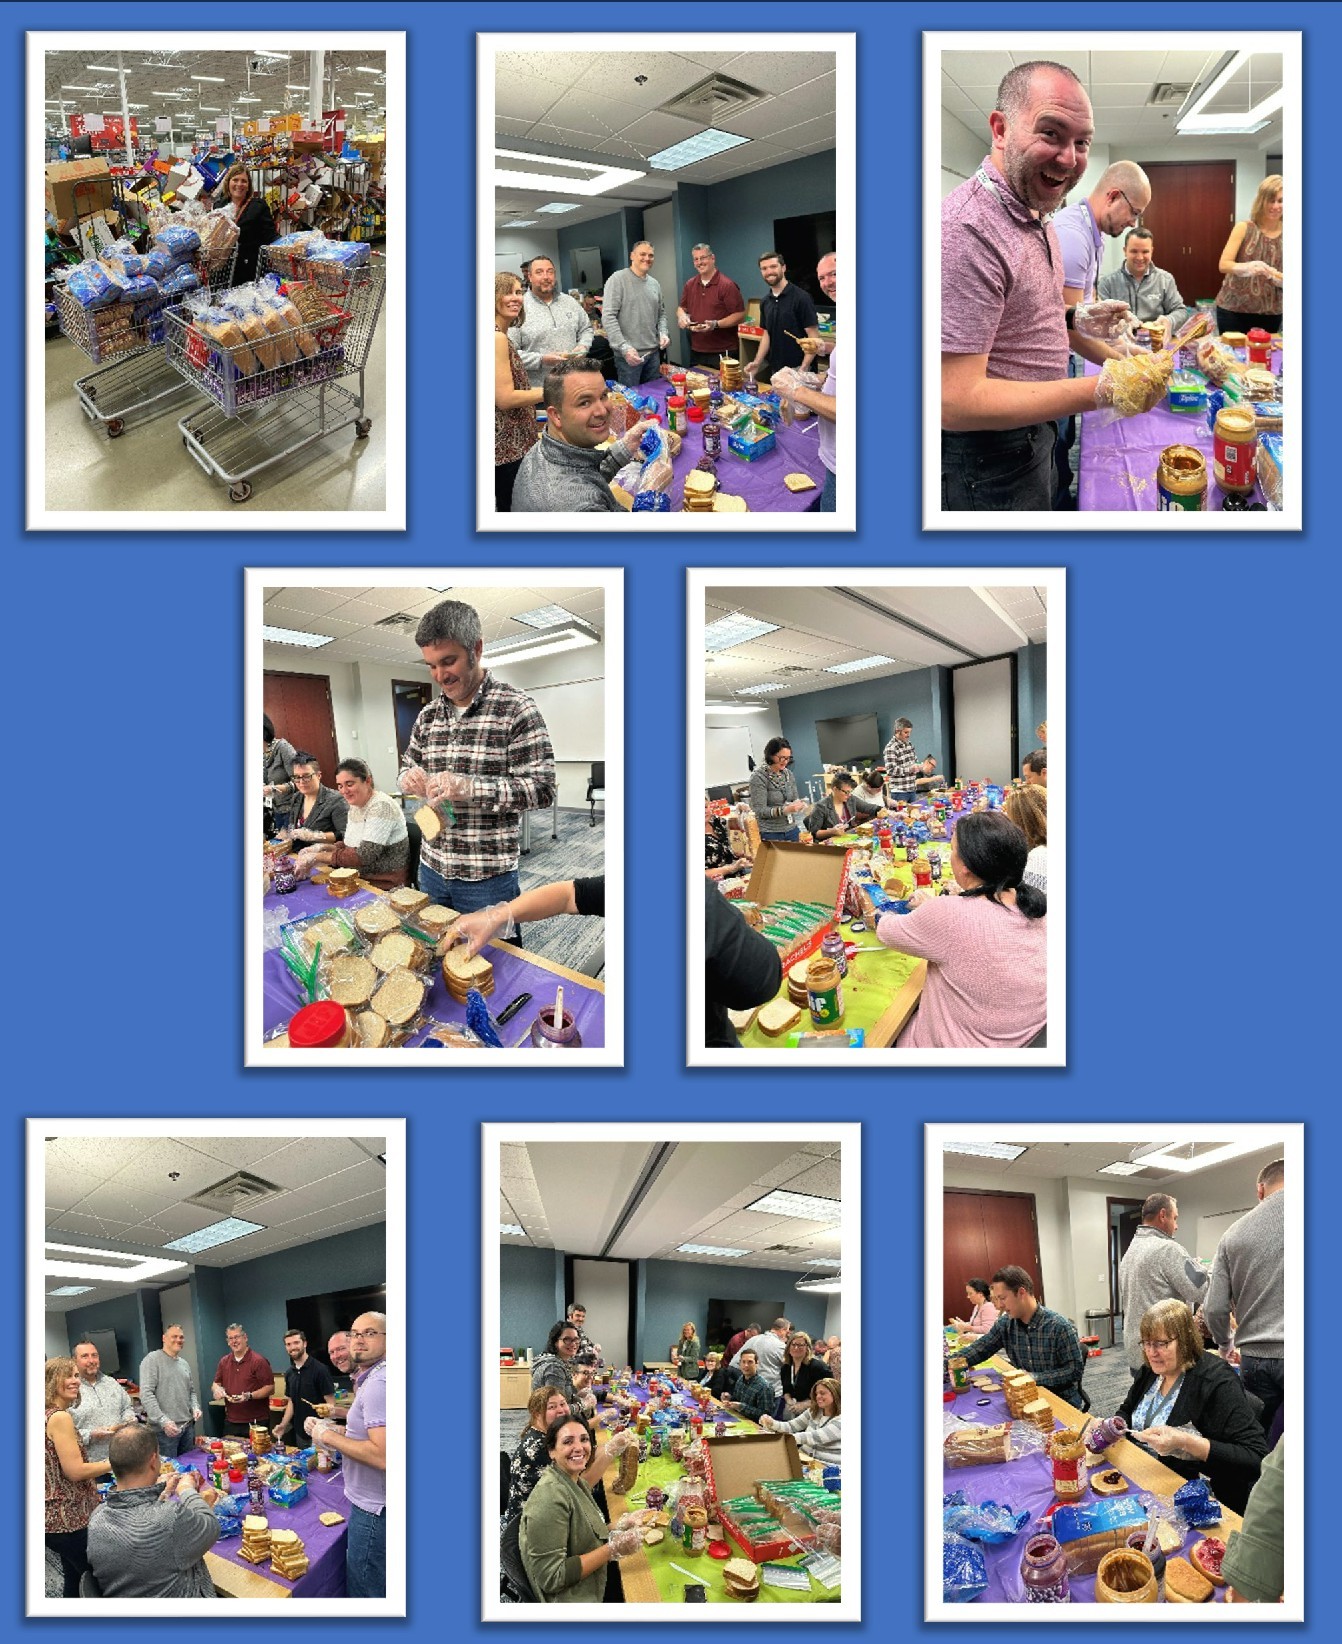 CTG colleagues made over 900 peanut butter and jelly sandwiches for a local shelter that feeds the hungry